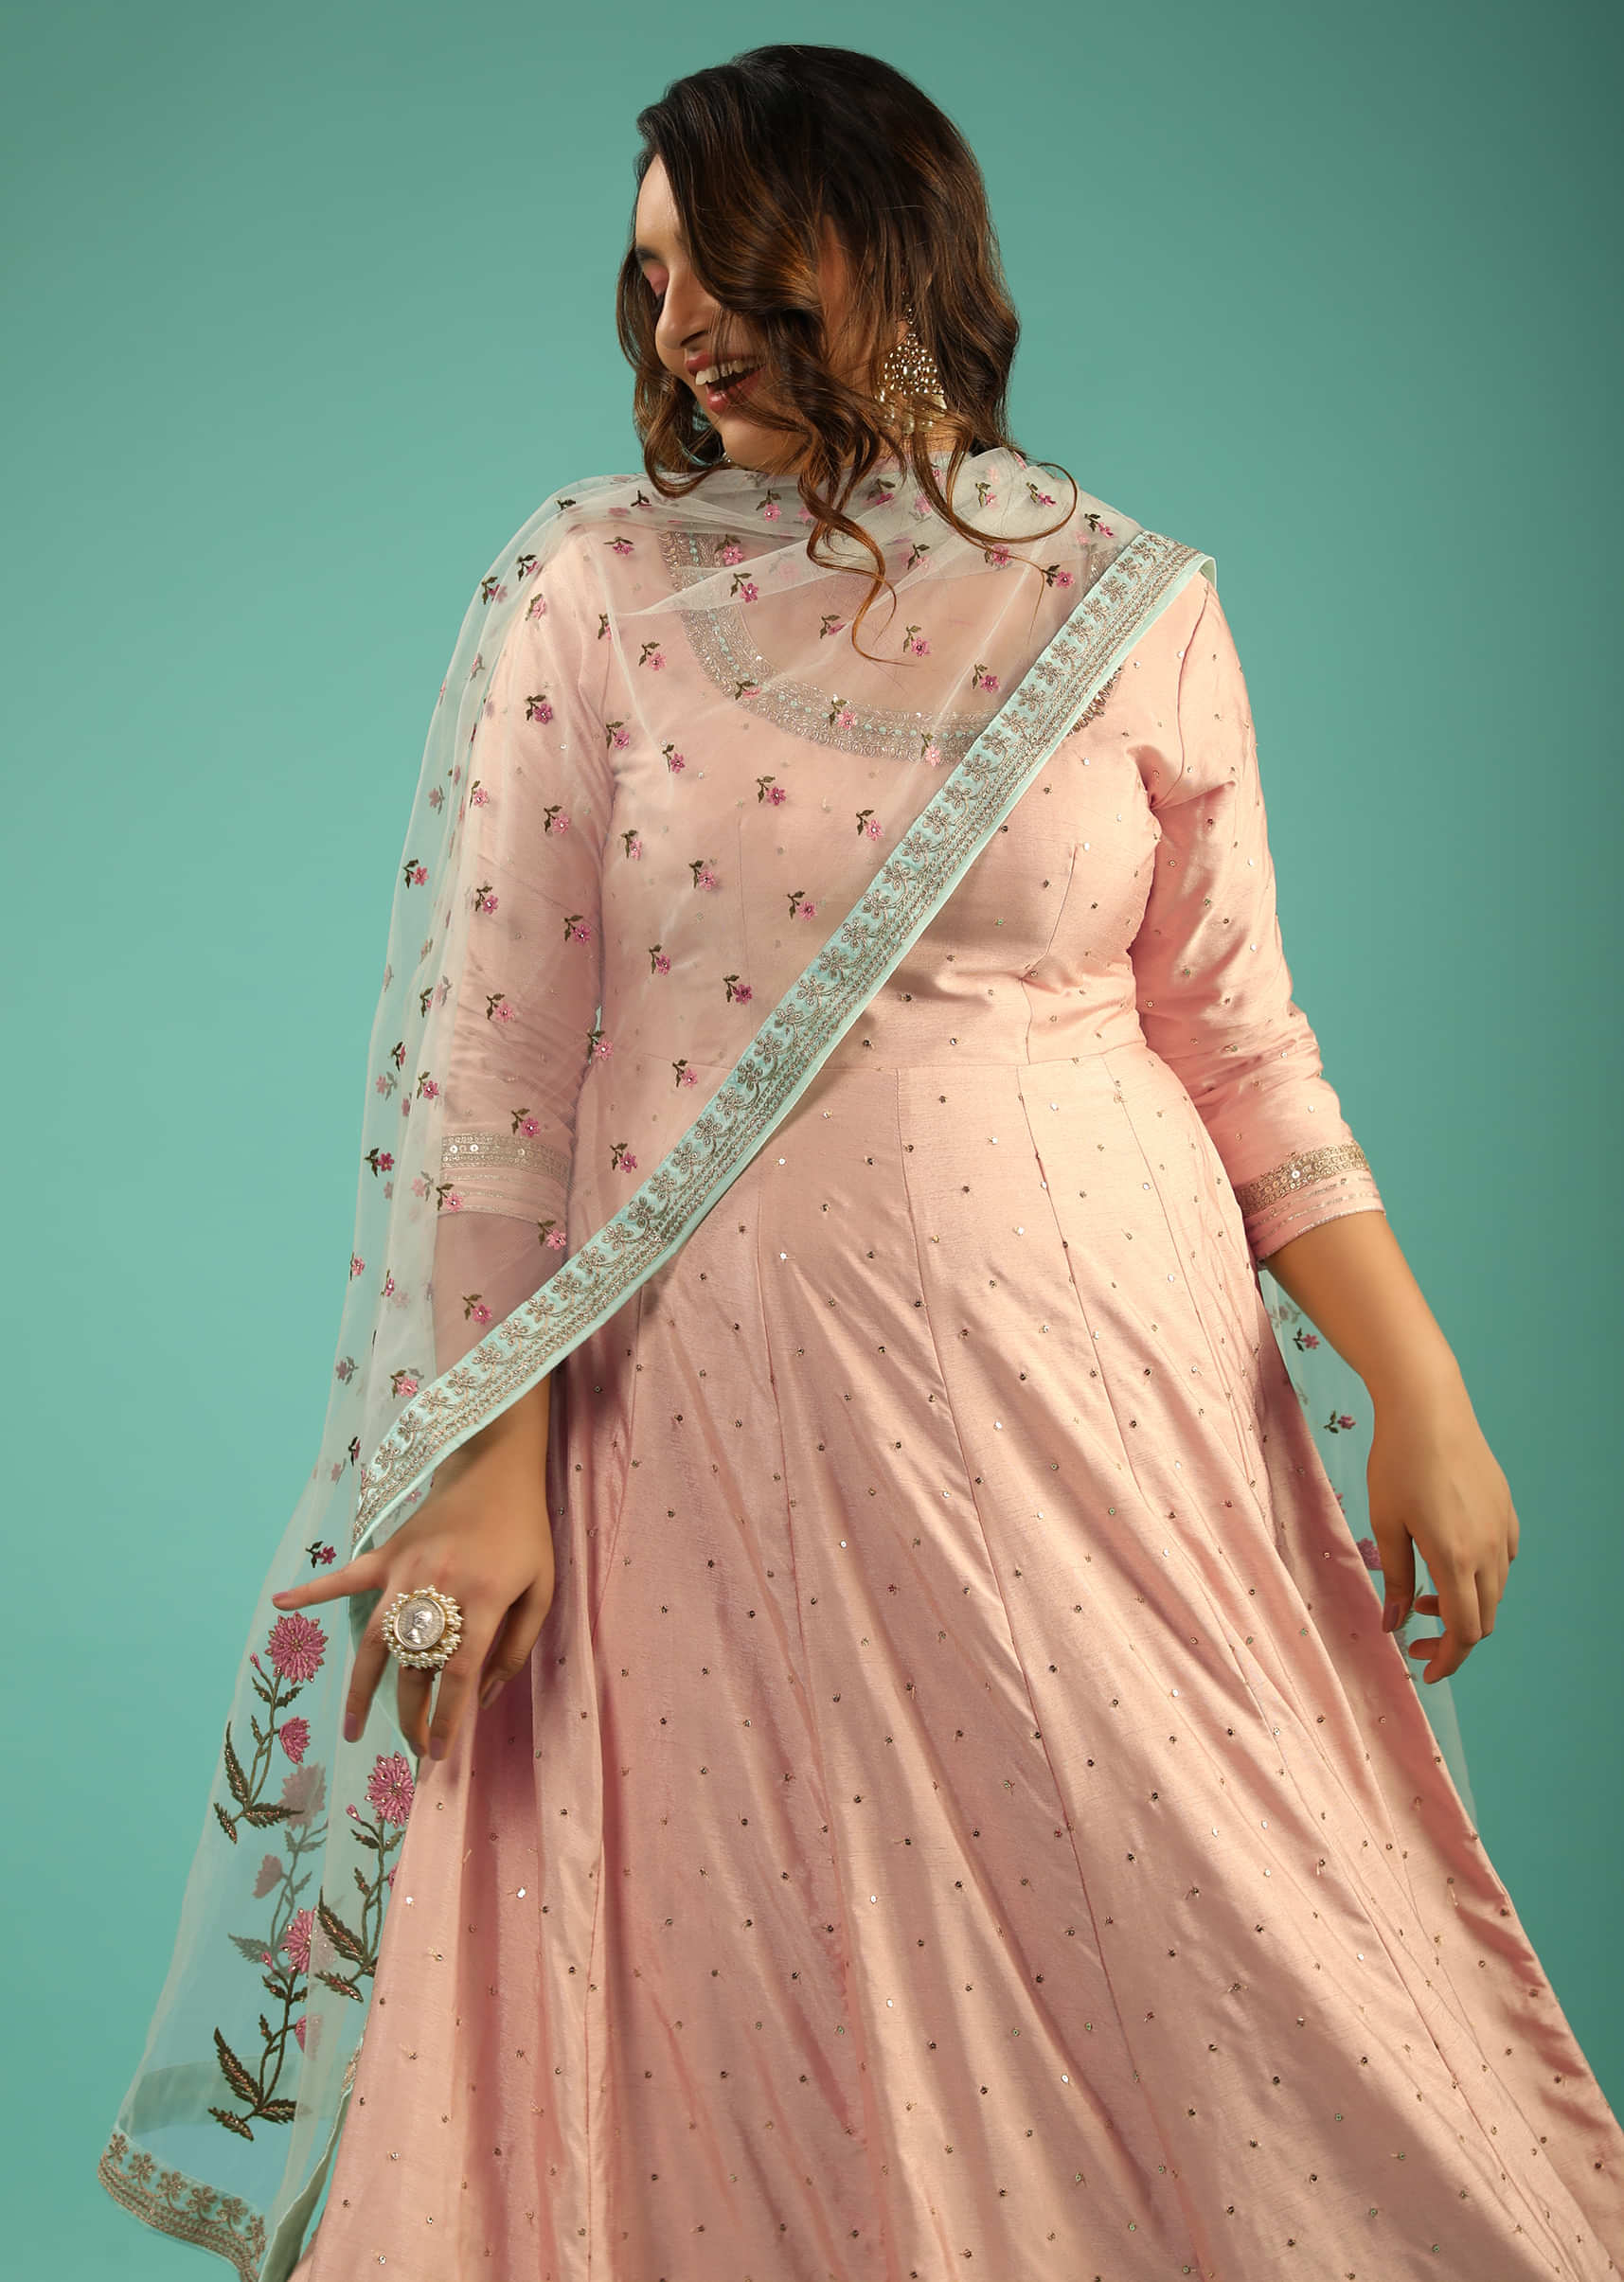 Peach Silk Anarkali Adorned With Zari Buttis And Sequins All Over